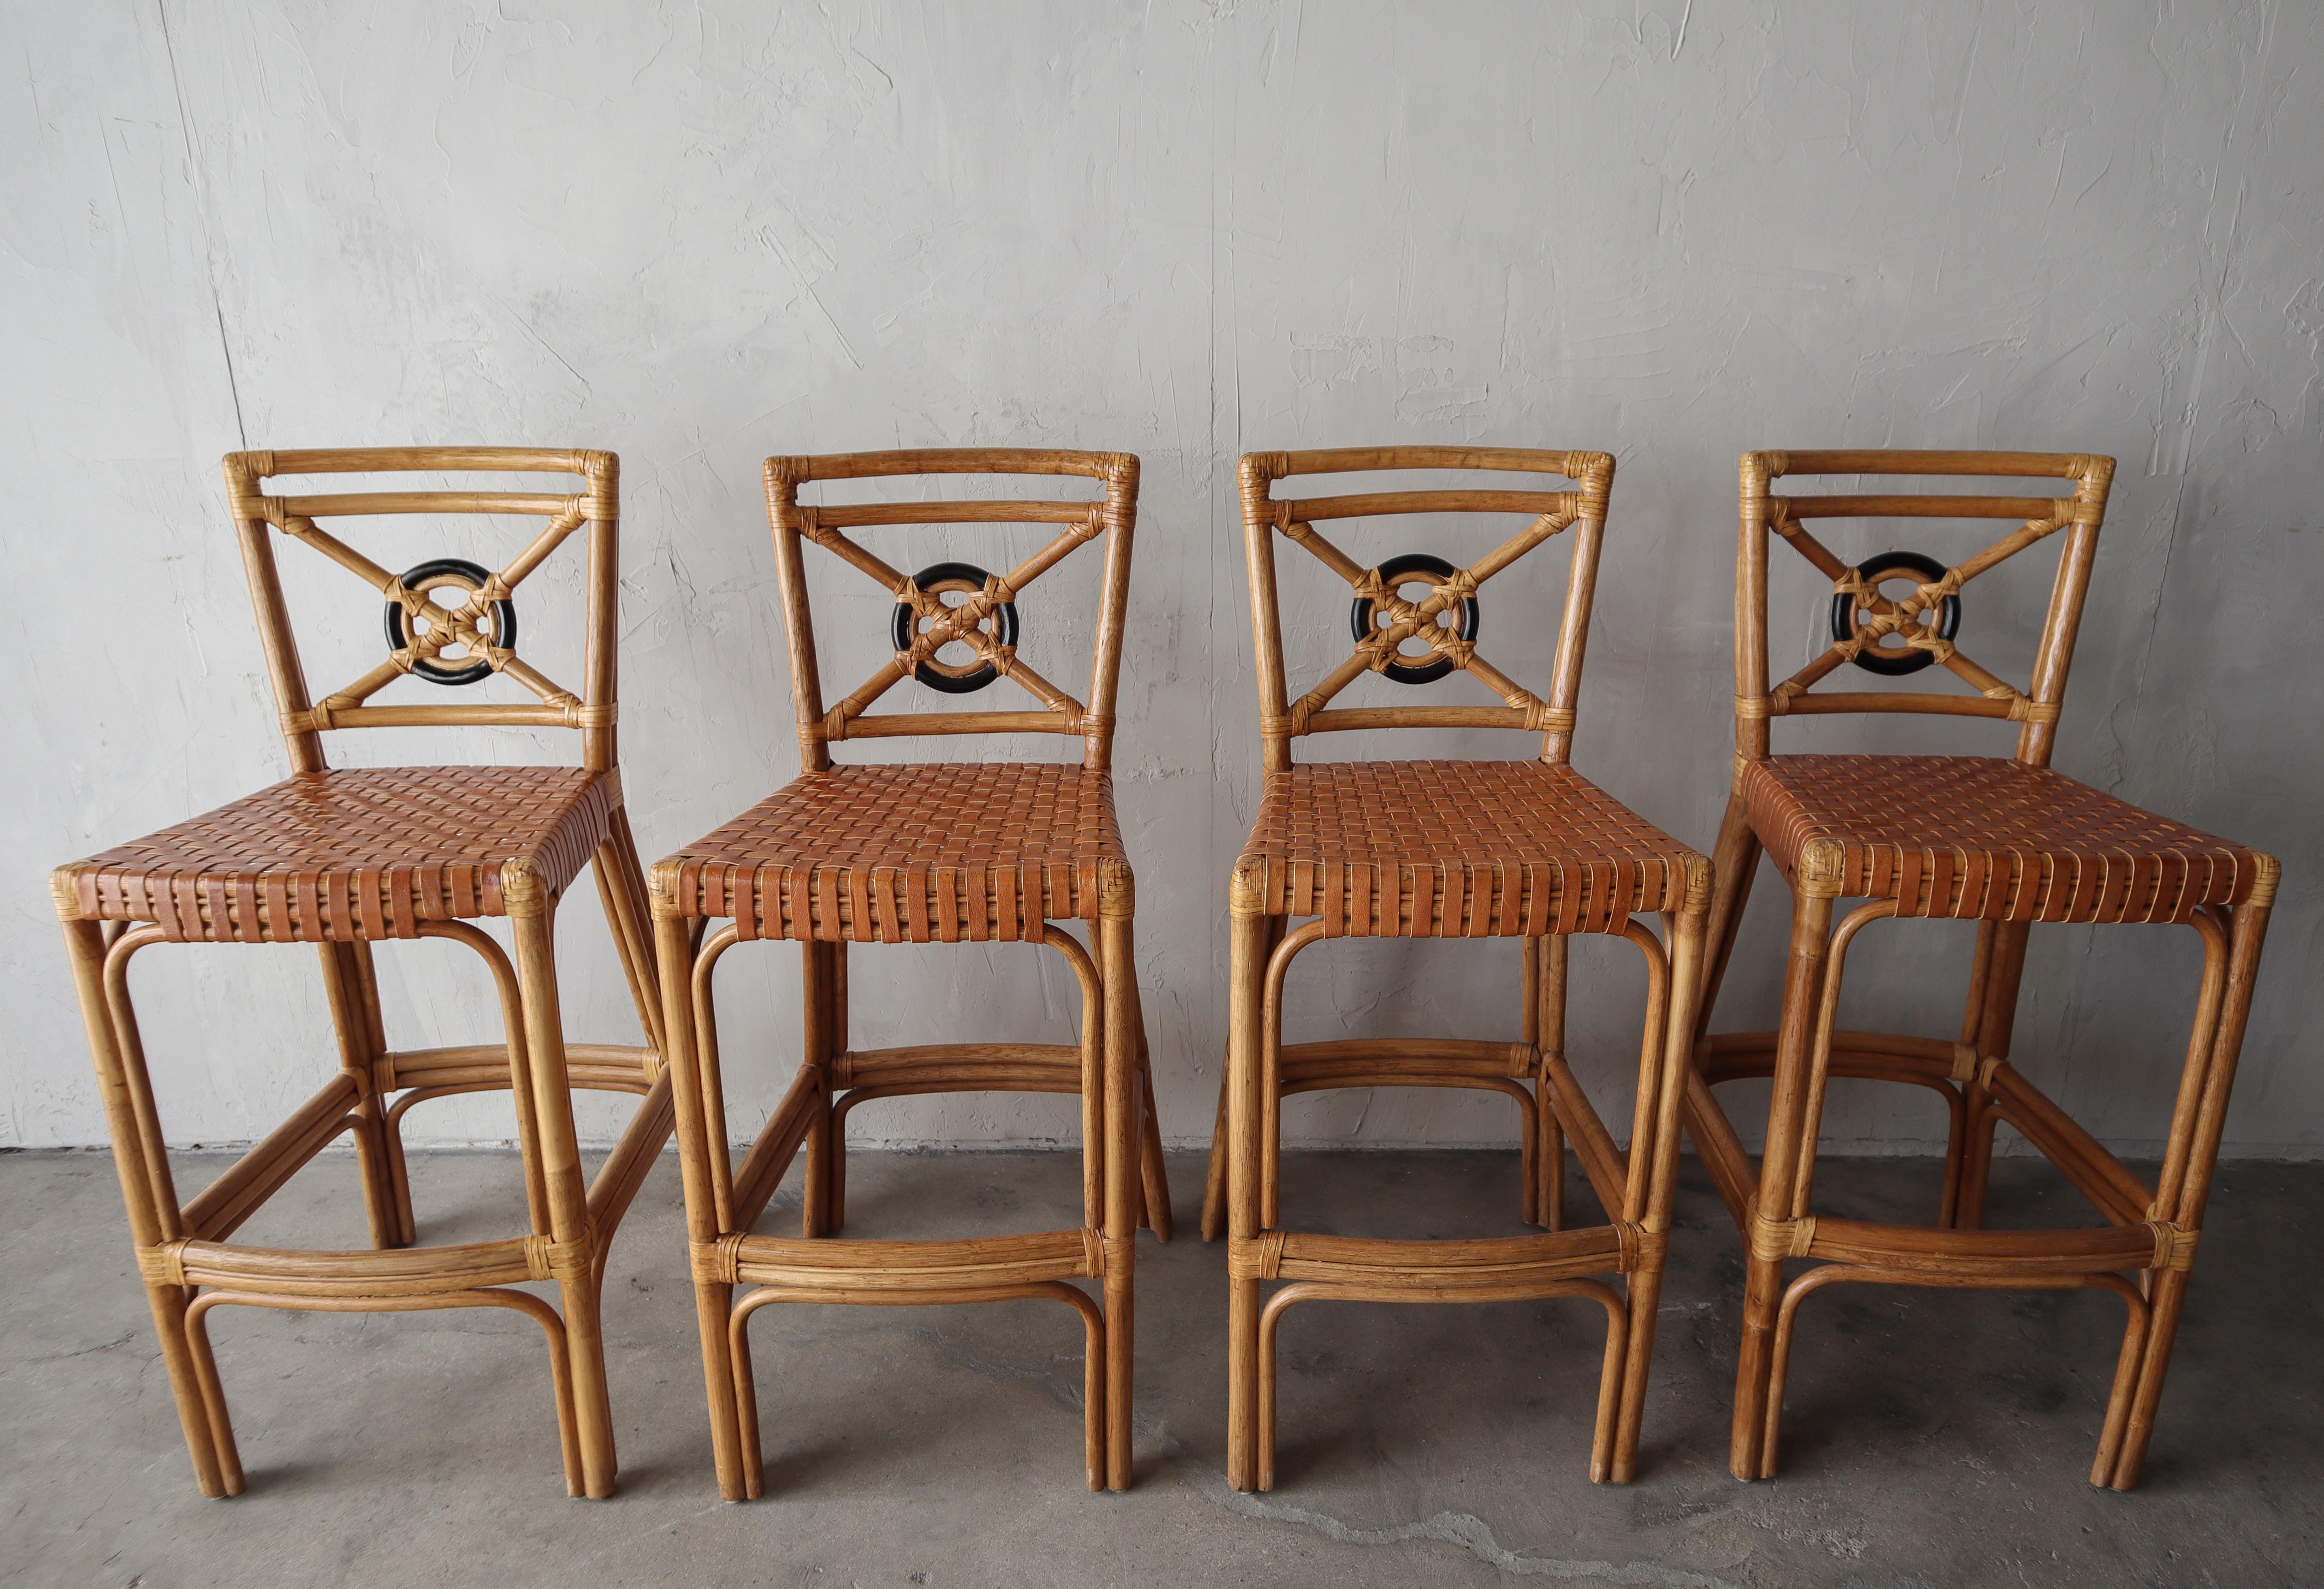 Stunning example of vintage bamboo. This gorgeous set of bamboo barstools with woven leather seats and hand tied leather details is the perfect. They will mesh well with many styles of decor.

The set of 4 is in excellent condition with little to